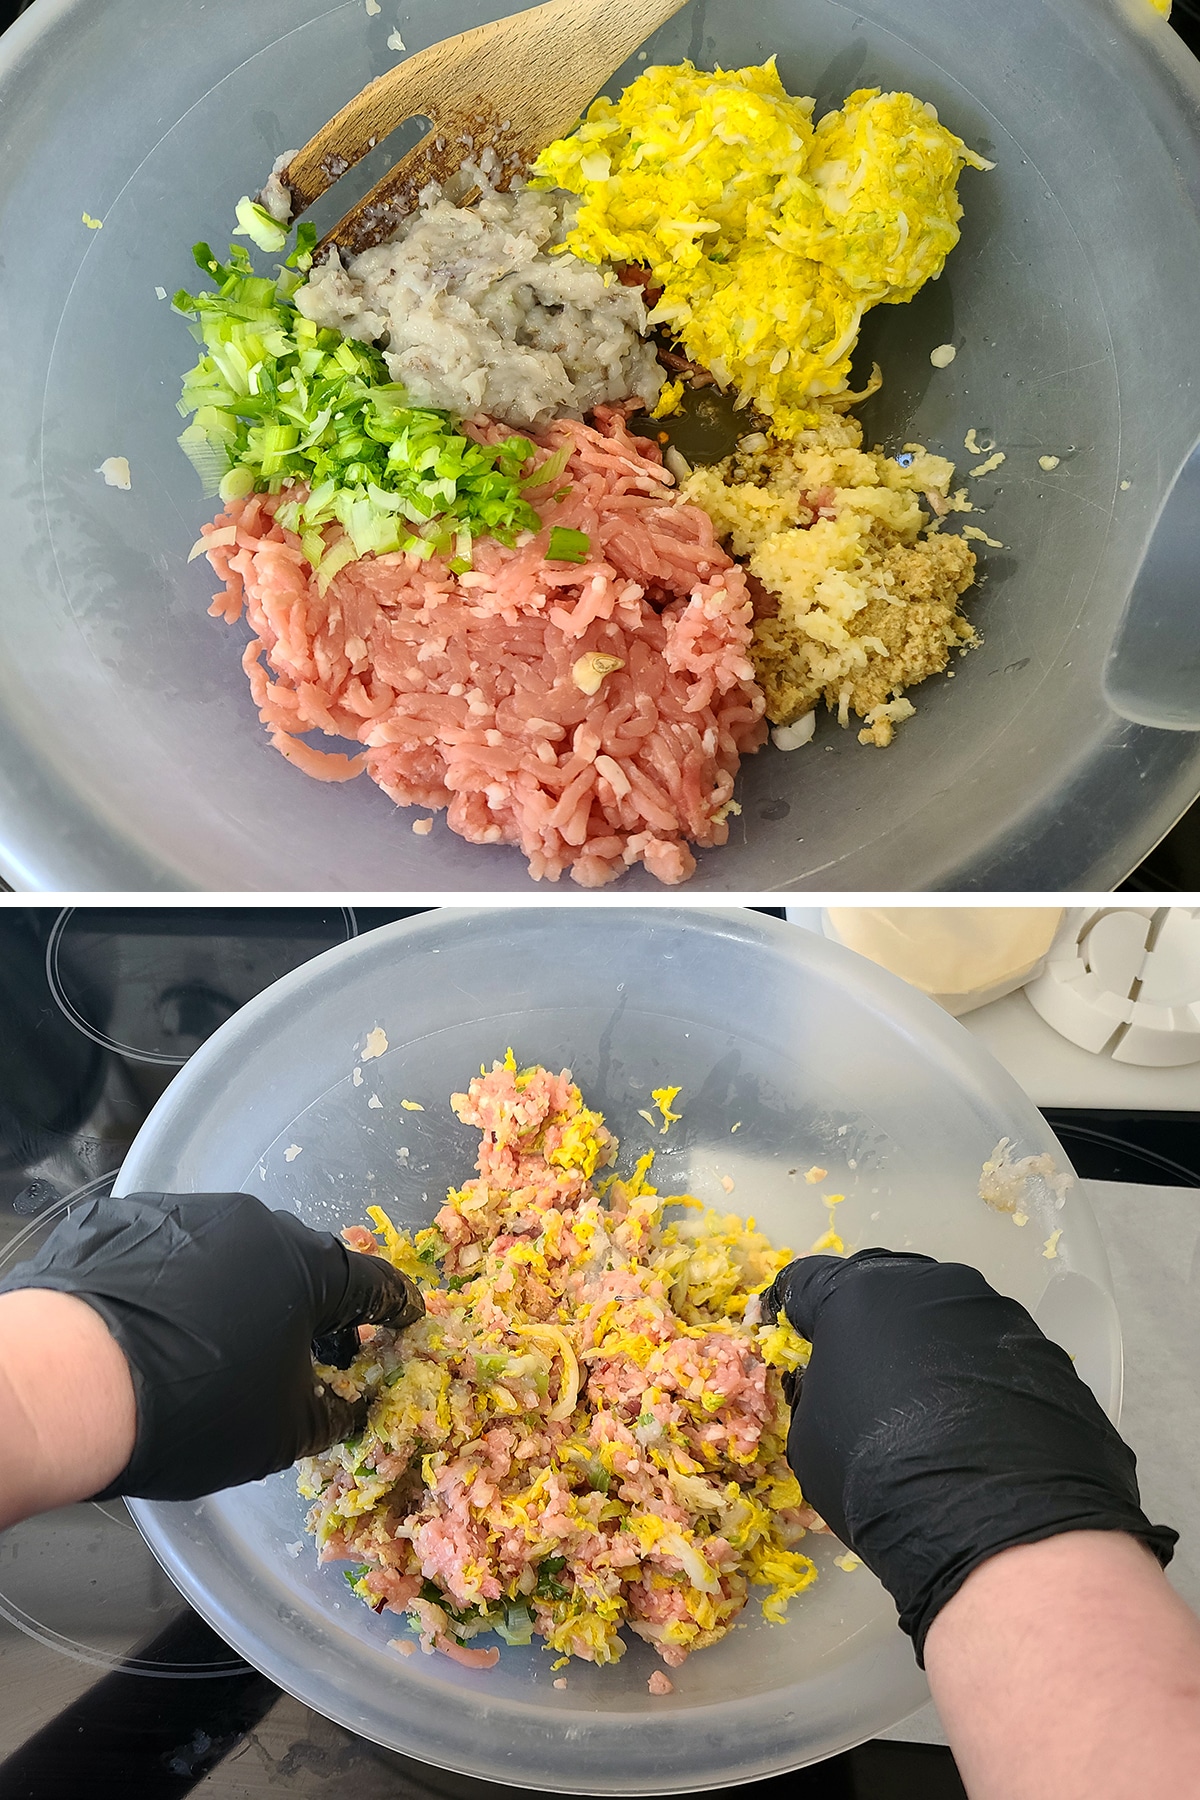 A two part image showing all of the filling ingredients in a big bowl, before and after being mixed together.